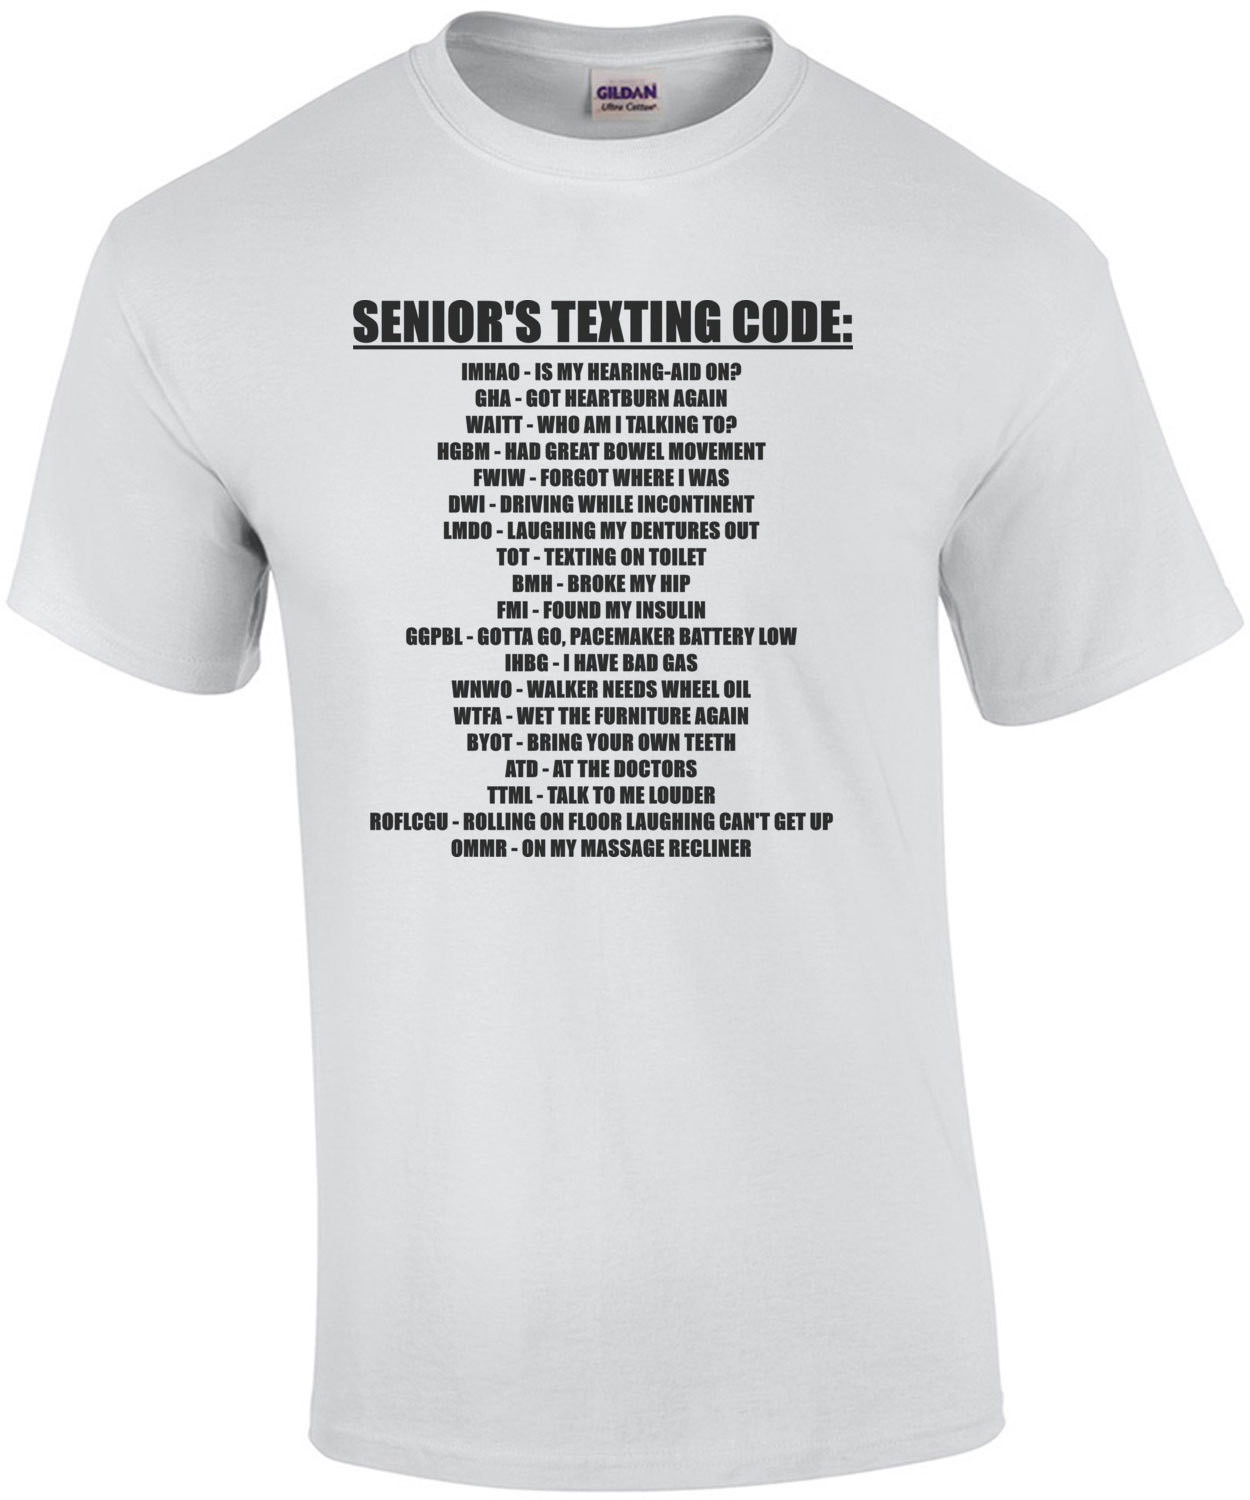 Senior's Texting Code - Funny Old People T-Shirt